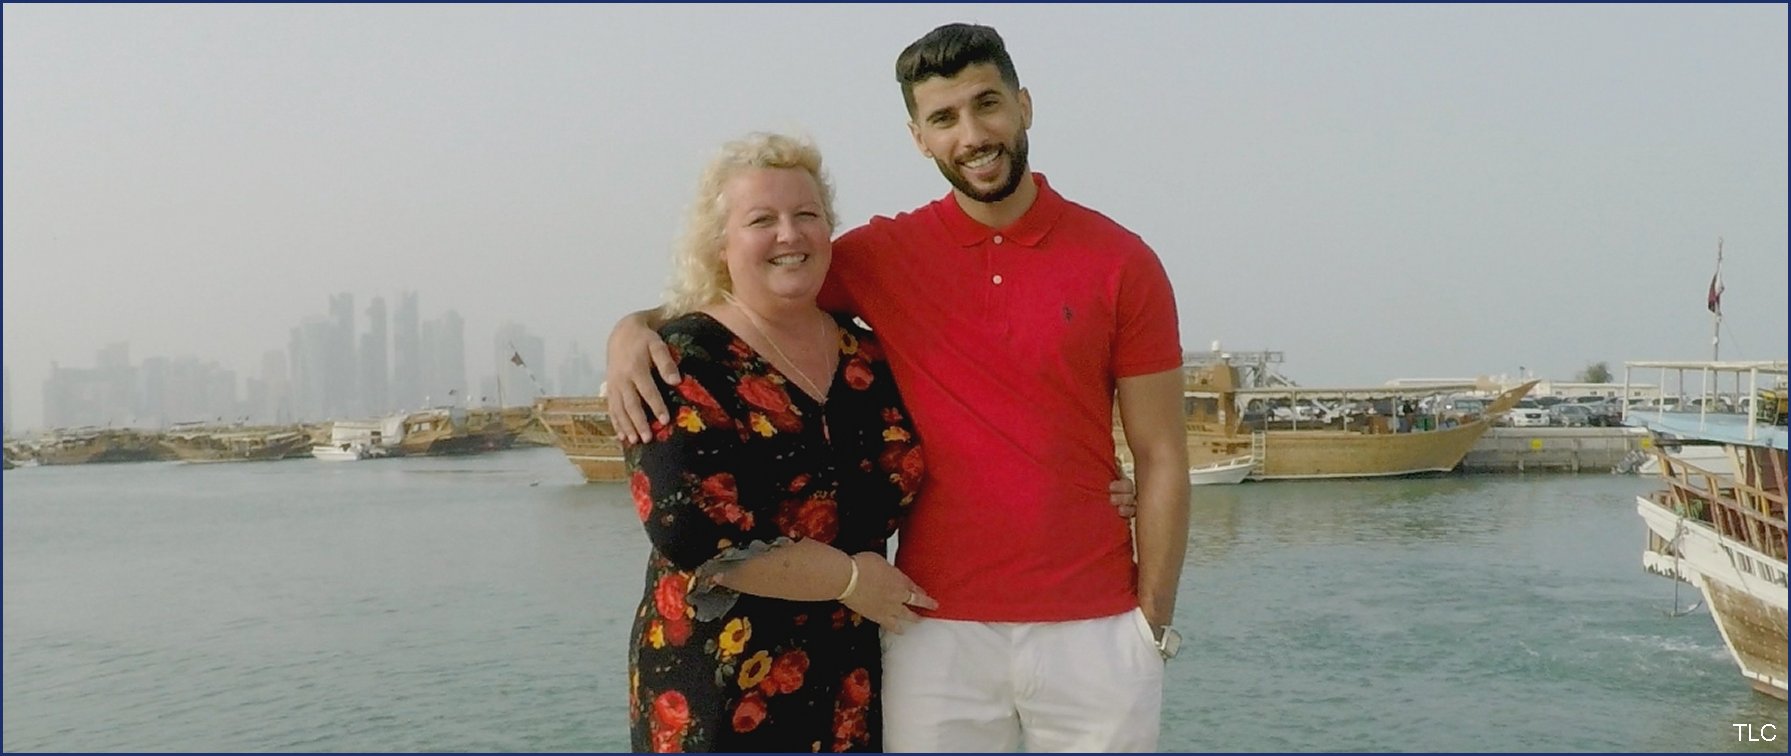 90 Day Fiance' star Aladin Jallali denies claims he's gay ...